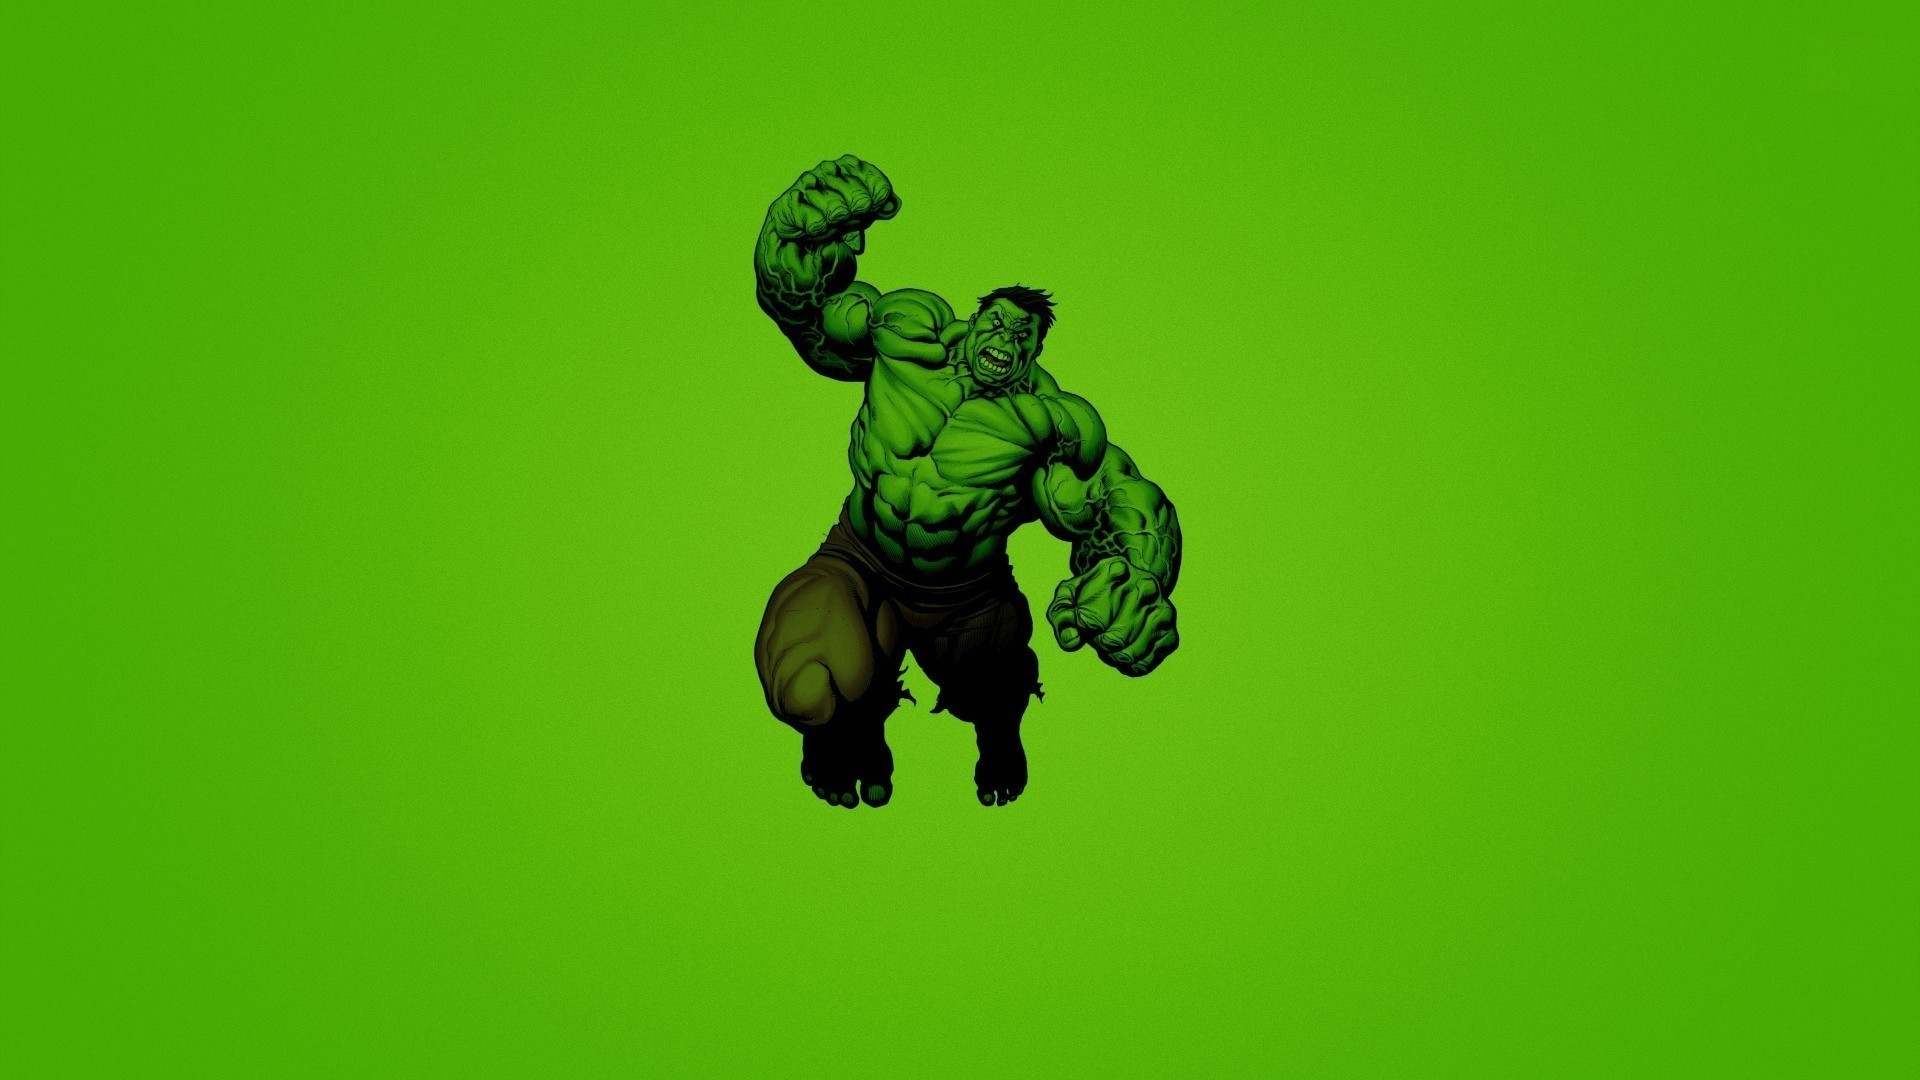 1920x1080 Incredible Hulk Wallpapers HD Backgrounds download.